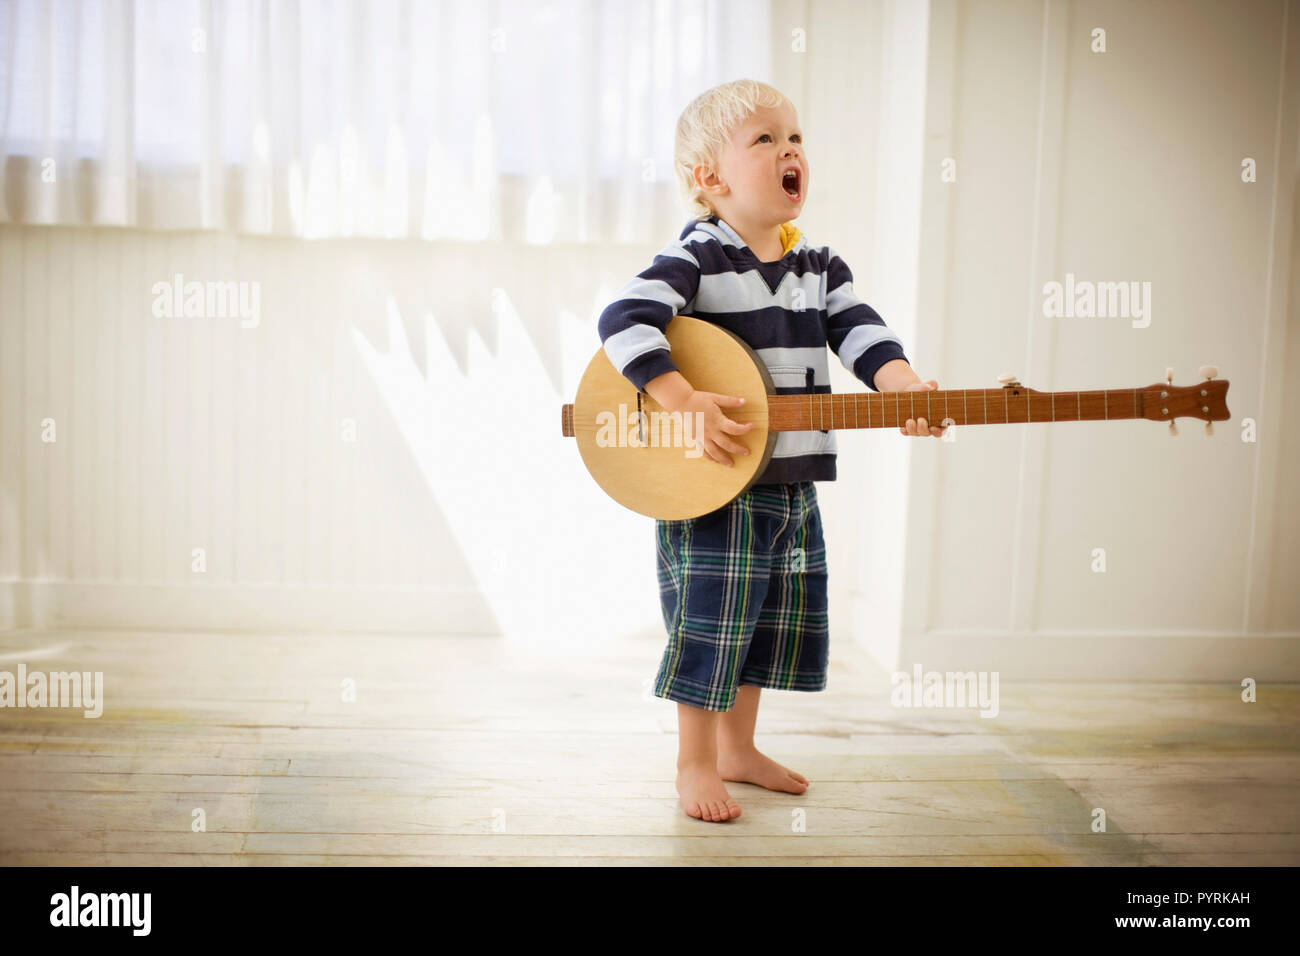 Toddler playing with a wooden banjo. Stock Photo